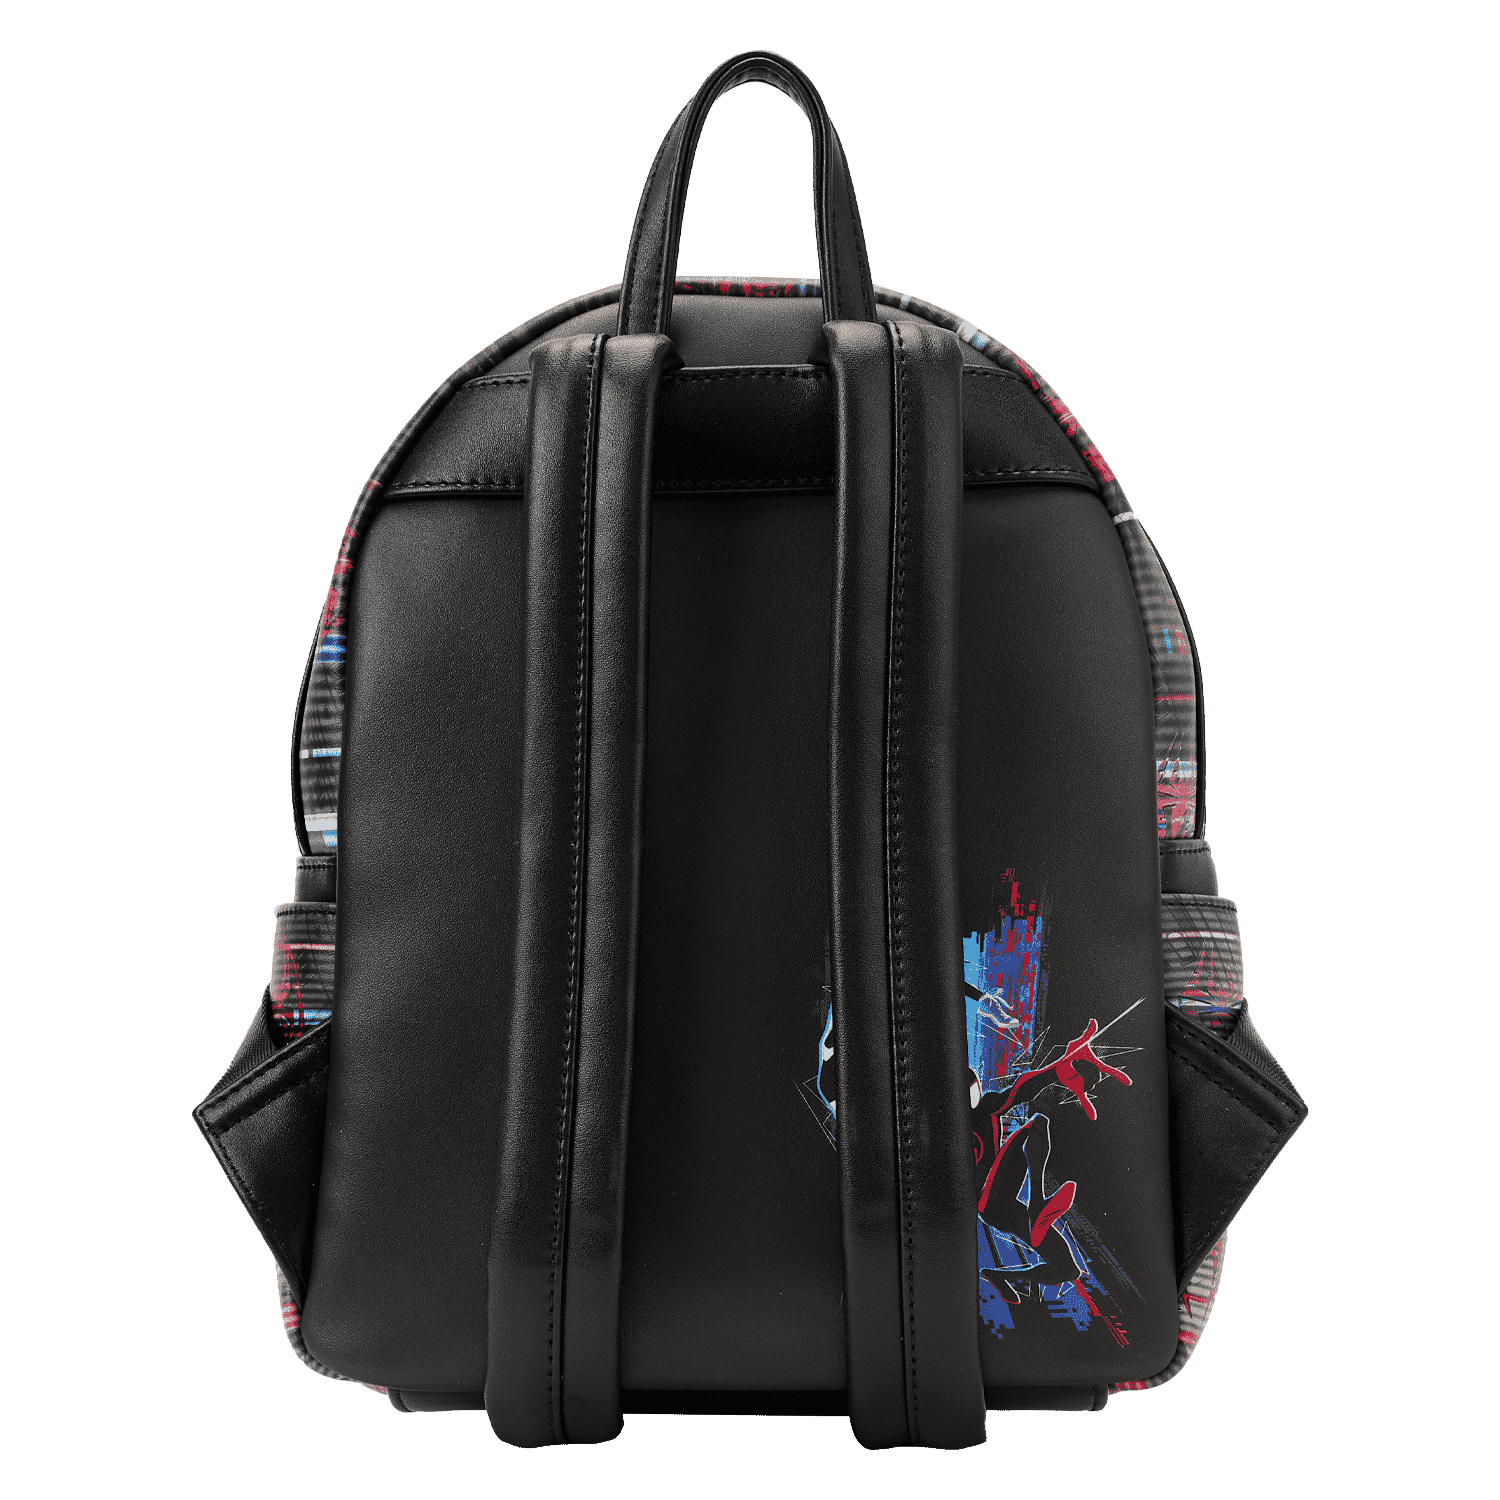 Buy Across the Spider-Verse Lenticular Mini Backpack at Loungefly.